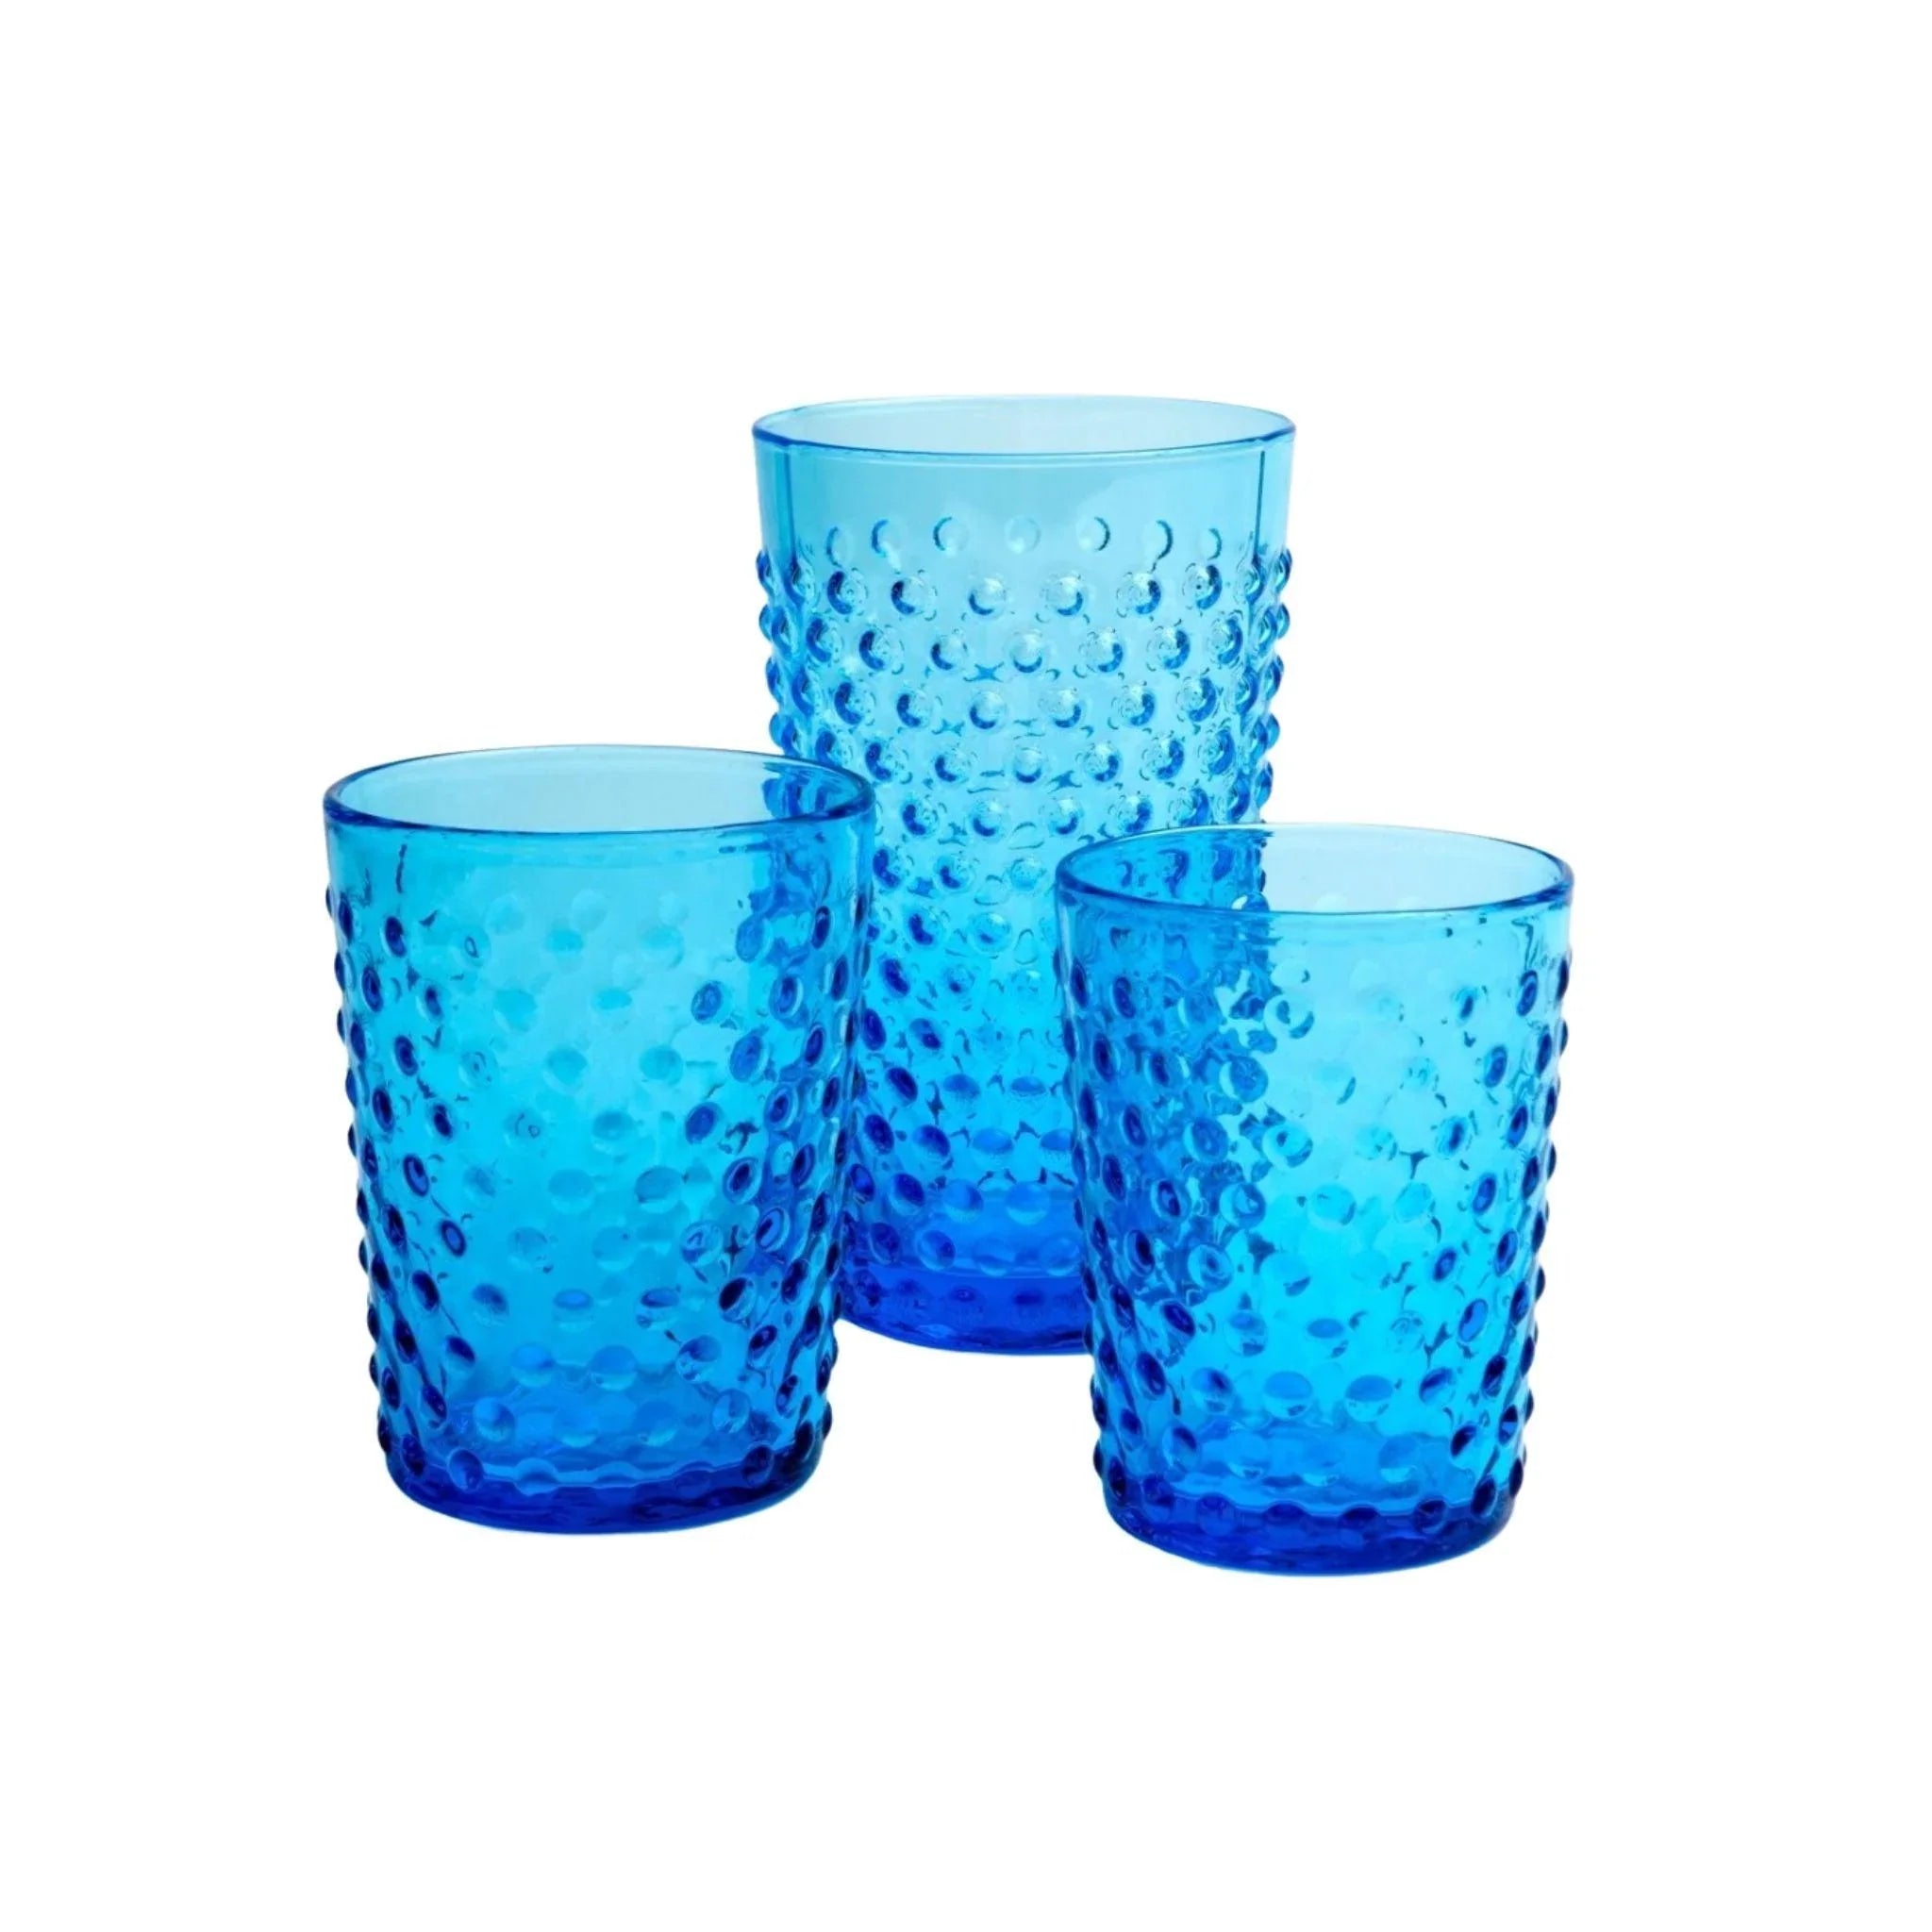 https://www.wellappointedhouse.com/cdn/shop/files/clear-raised-dot-surface-hand-blown-glasses-in-true-blue-drinkware-the-well-appointed-house-1_8b47ccdd-2b82-470e-8226-b598fa6f03fd.webp?v=1691670496